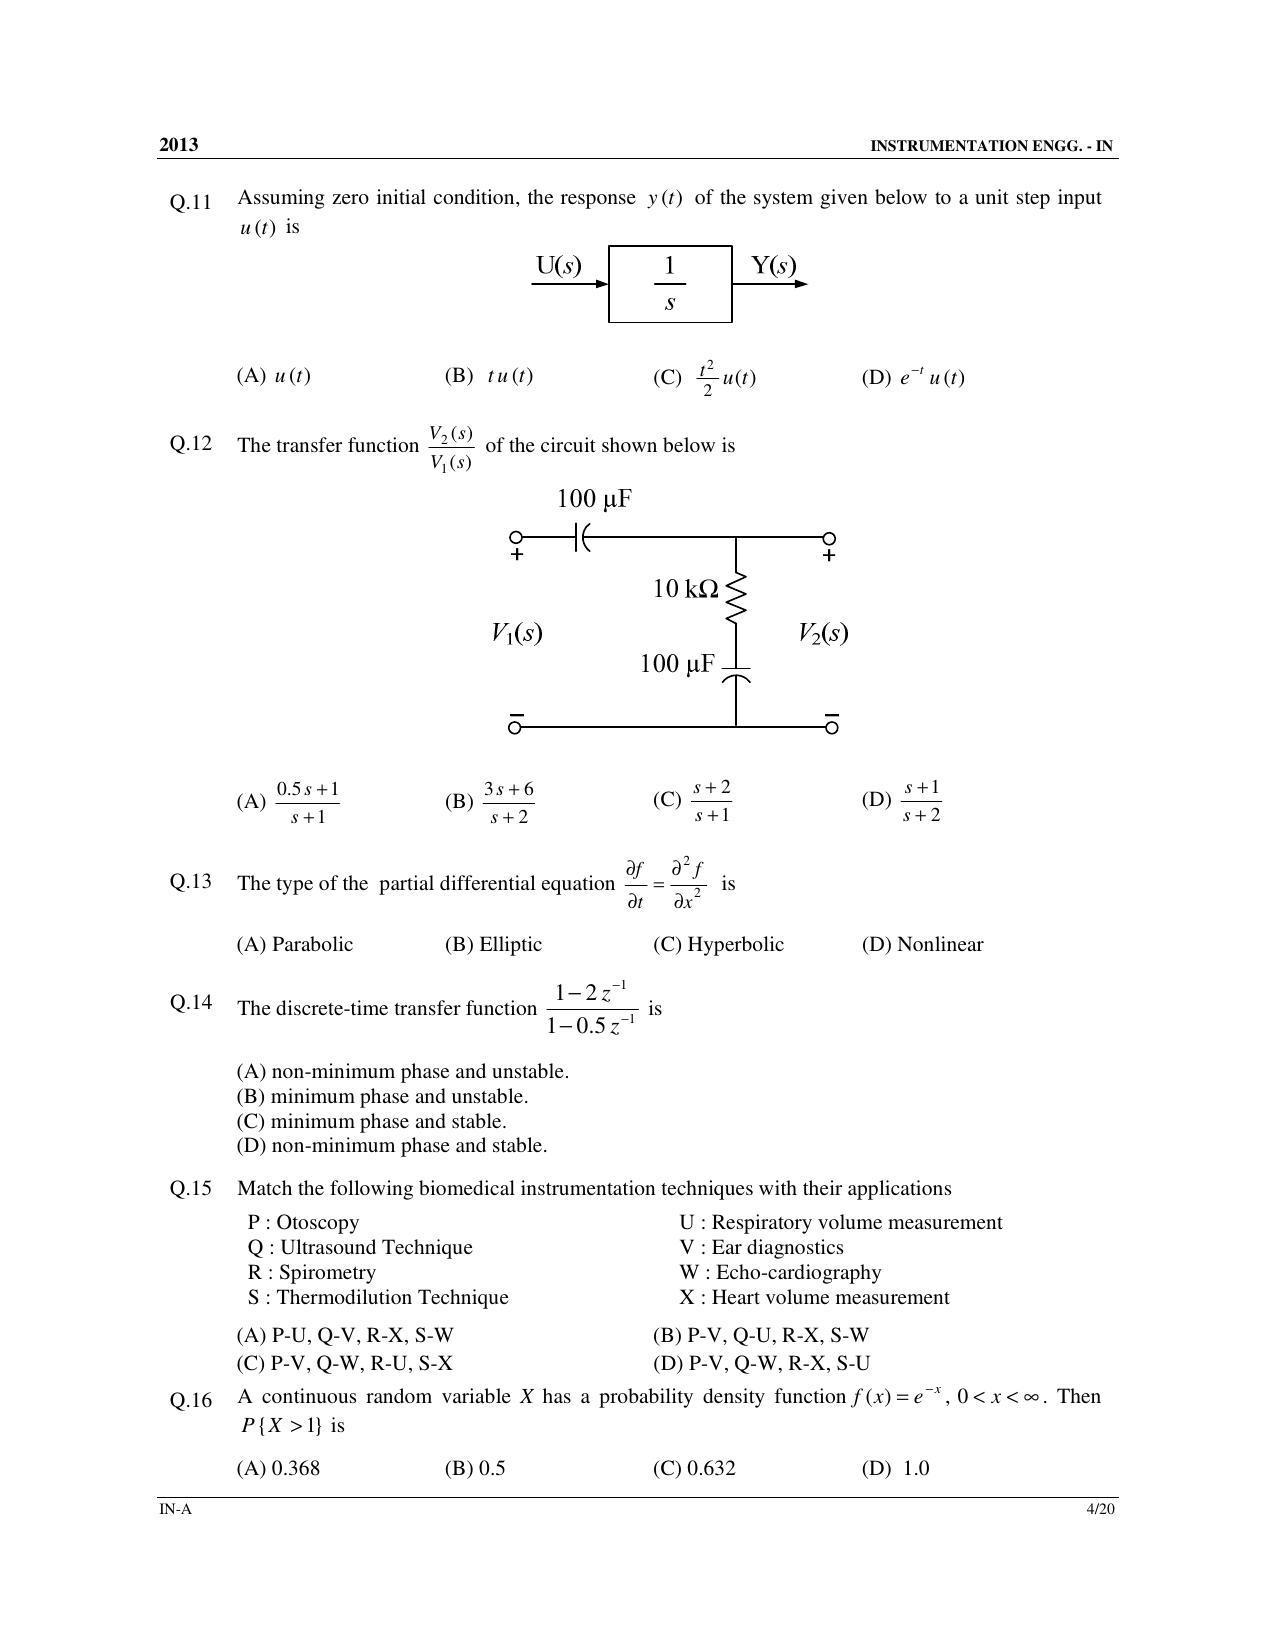 GATE 2013 Instrumentation Engineering (IN) Question Paper with Answer Key - Page 5